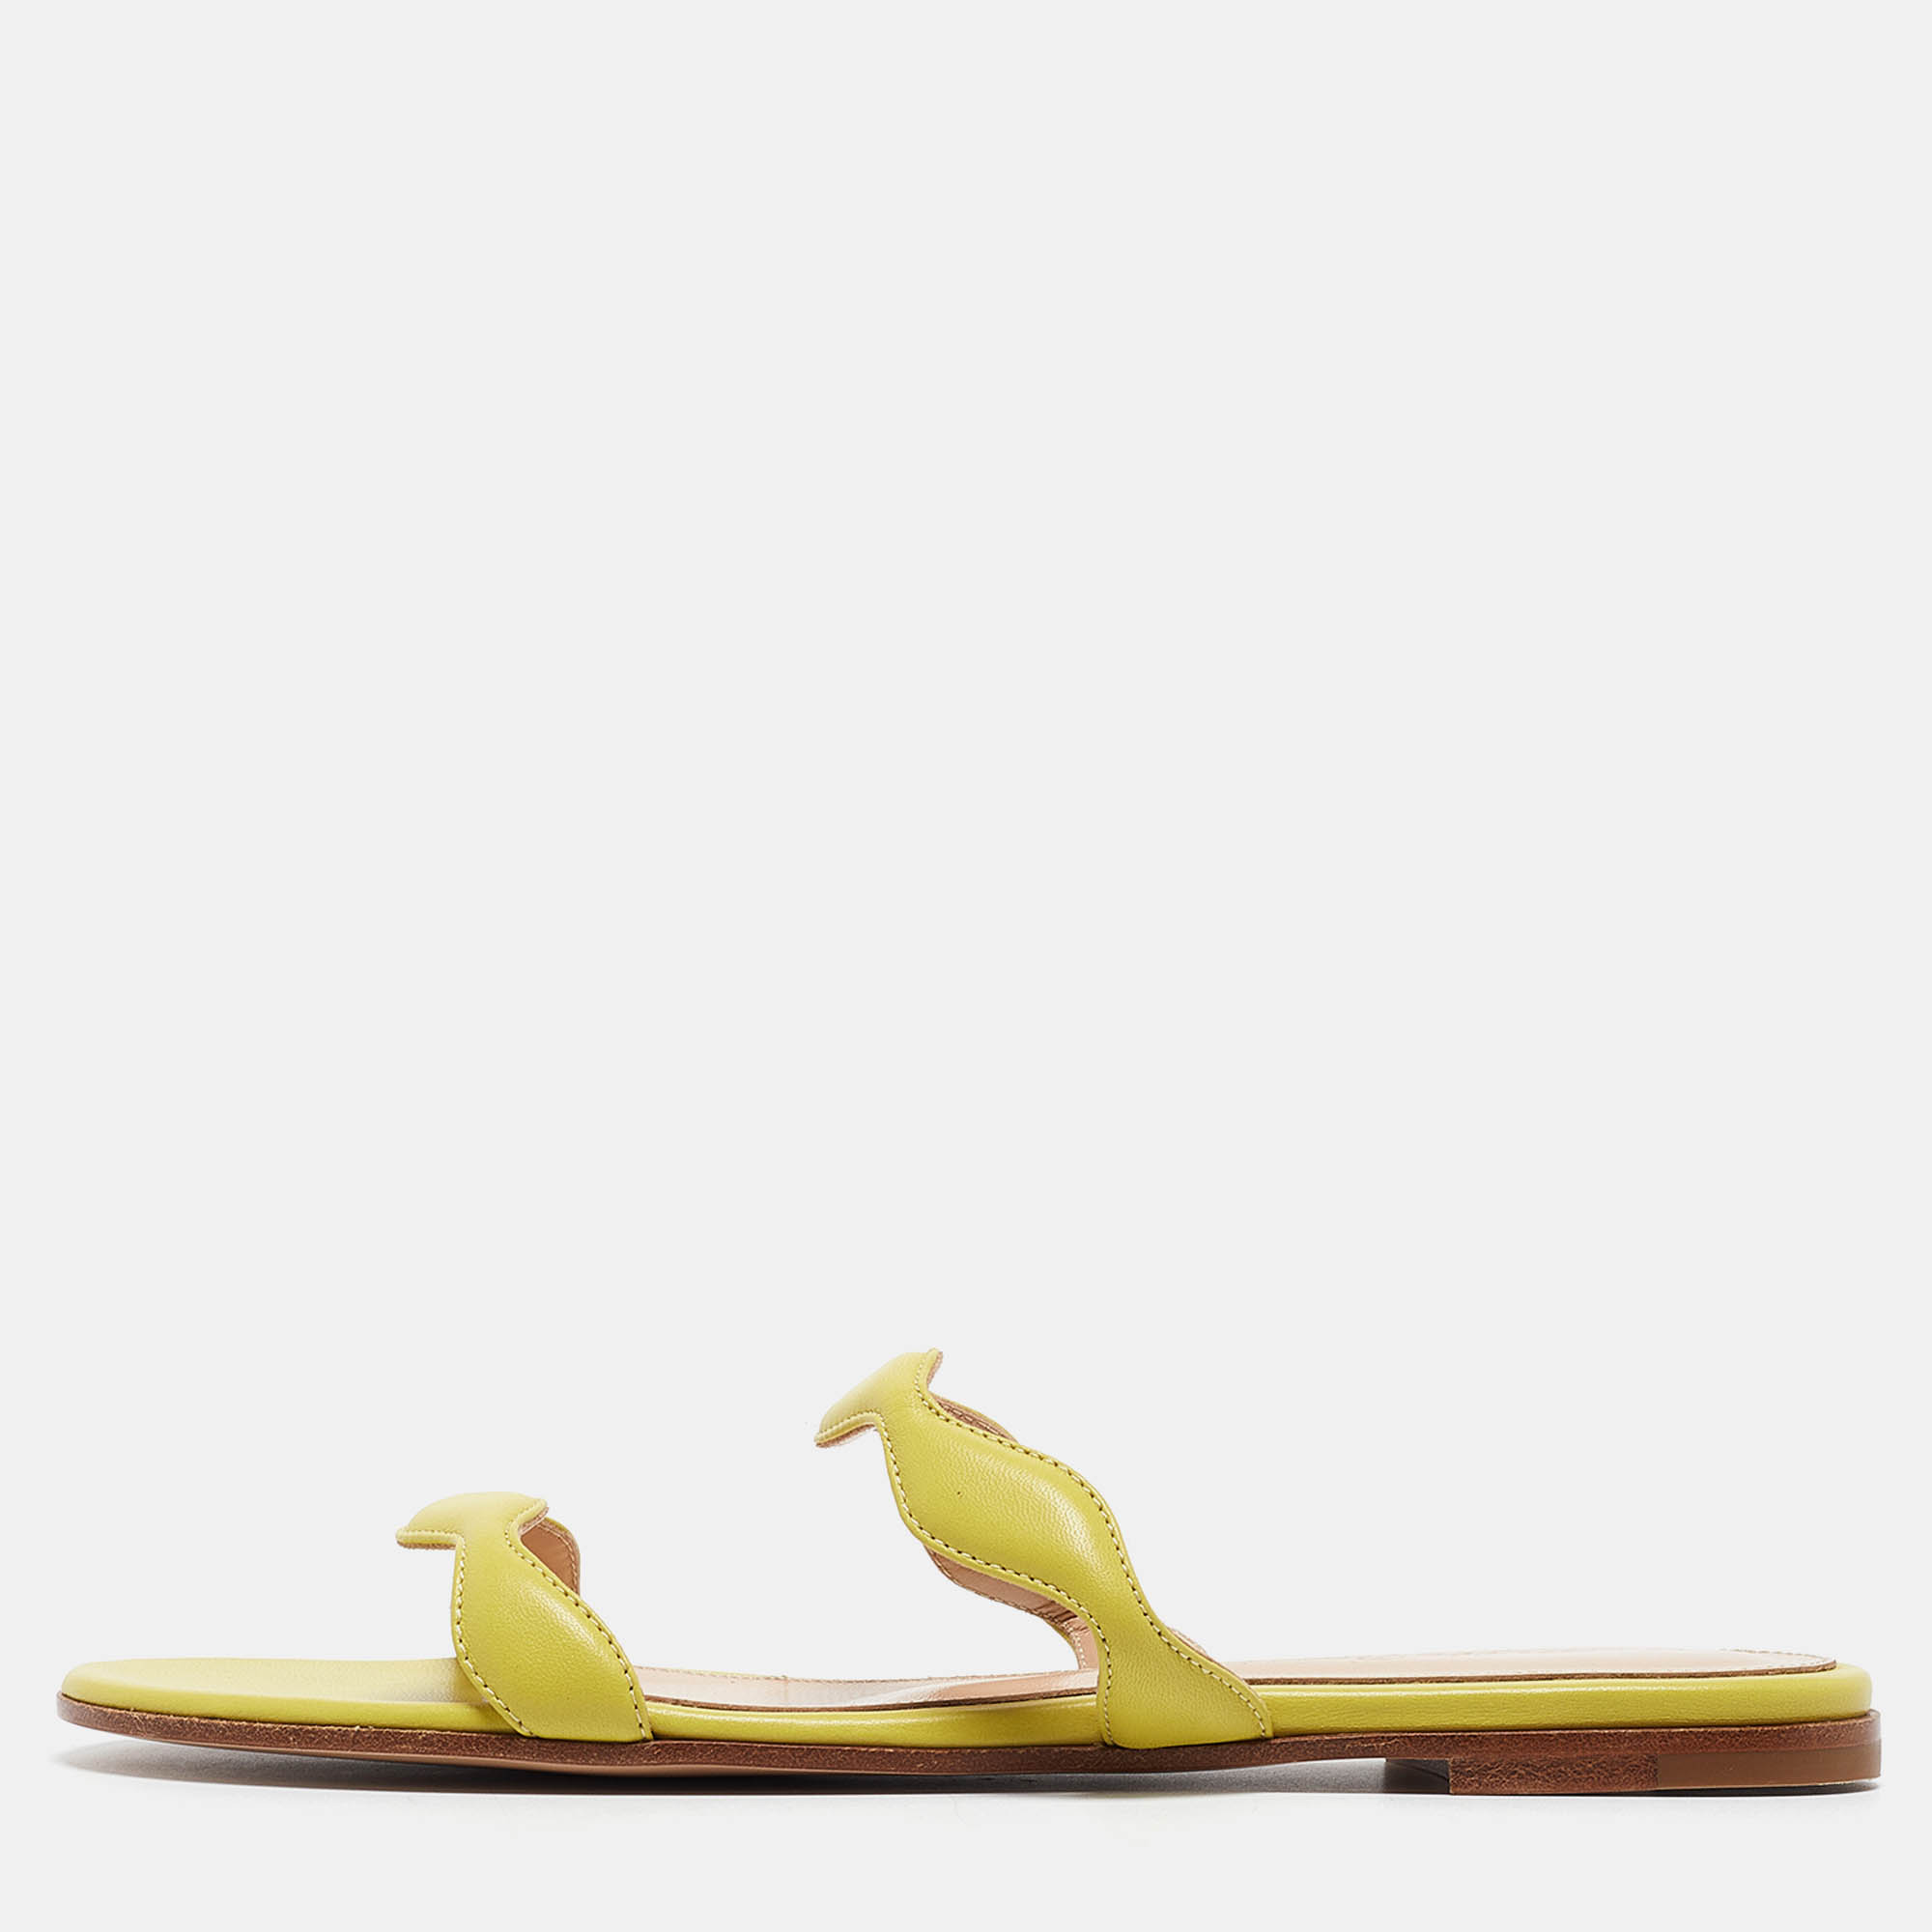 Pre-owned Gianvito Rossi Yellow Leather Wavy Flat Slides Size 37